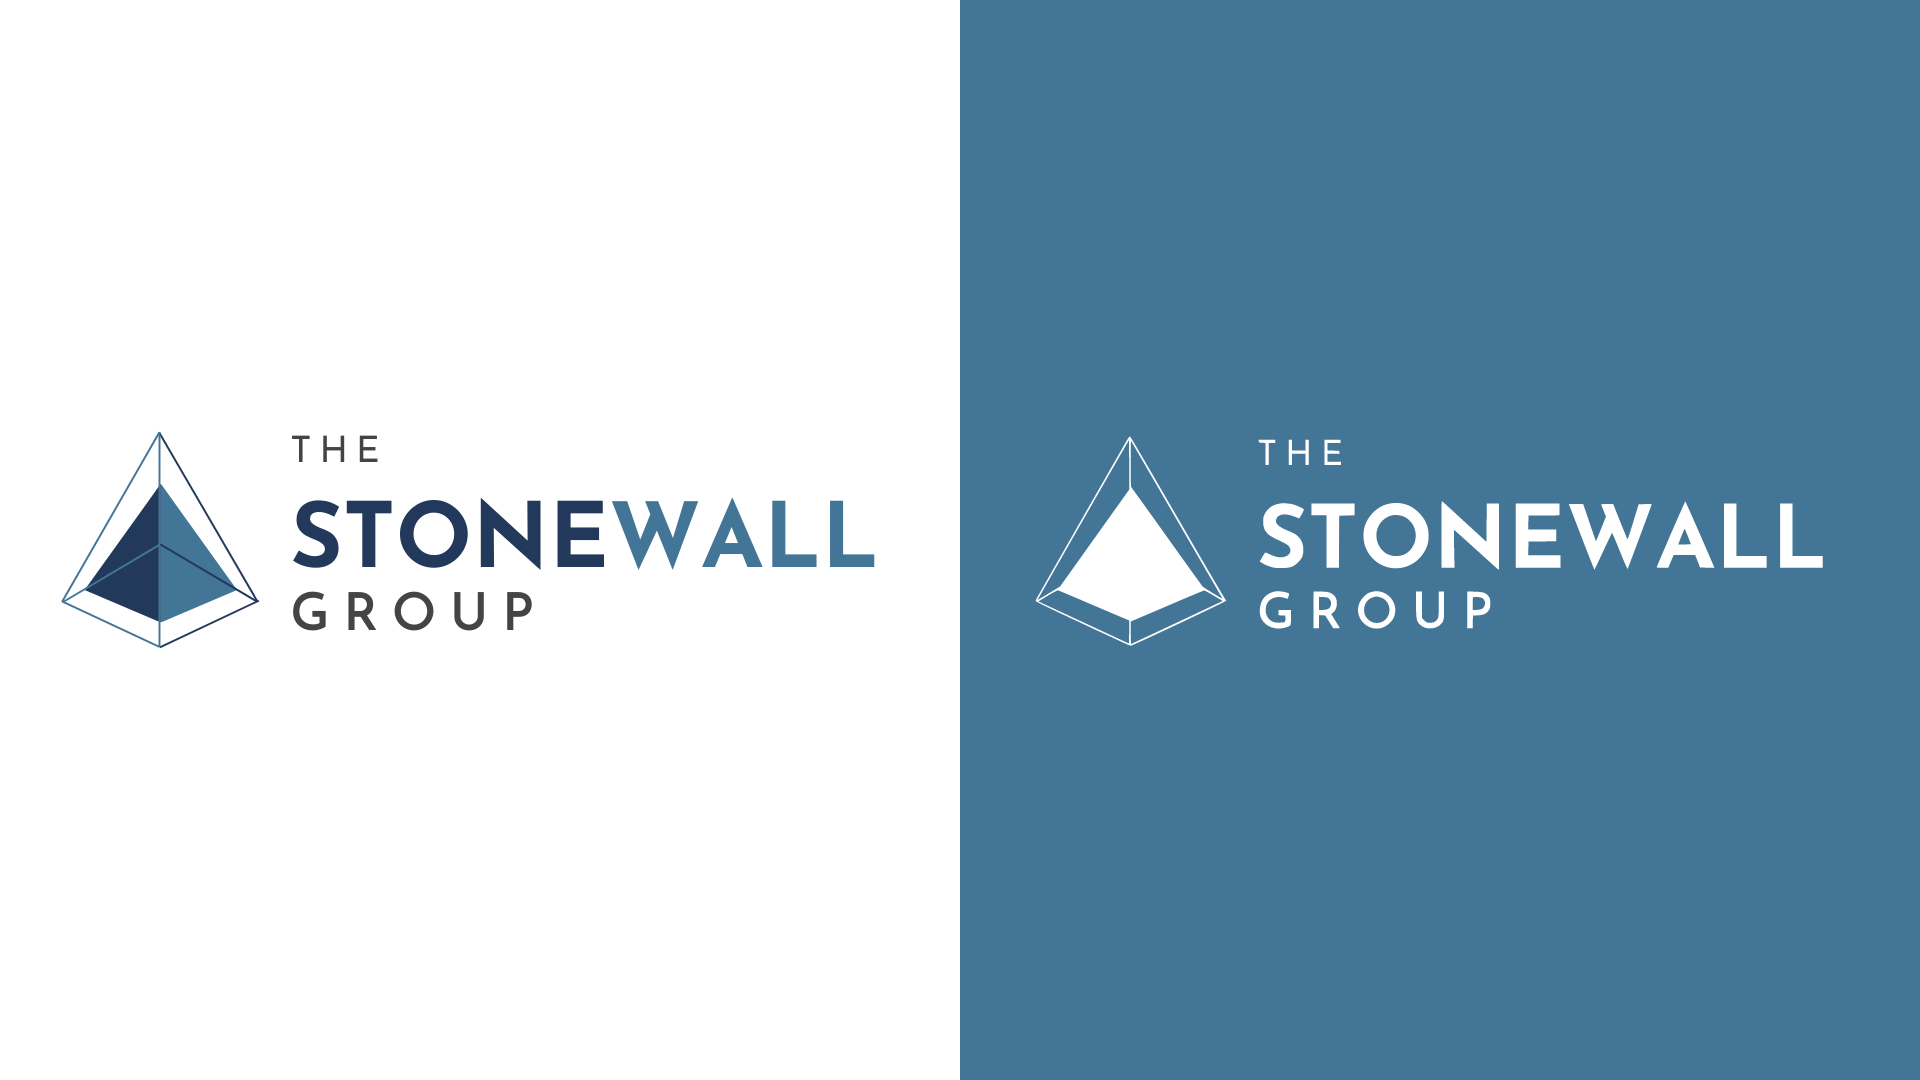 Brand Guidelines - The Stonewall Group